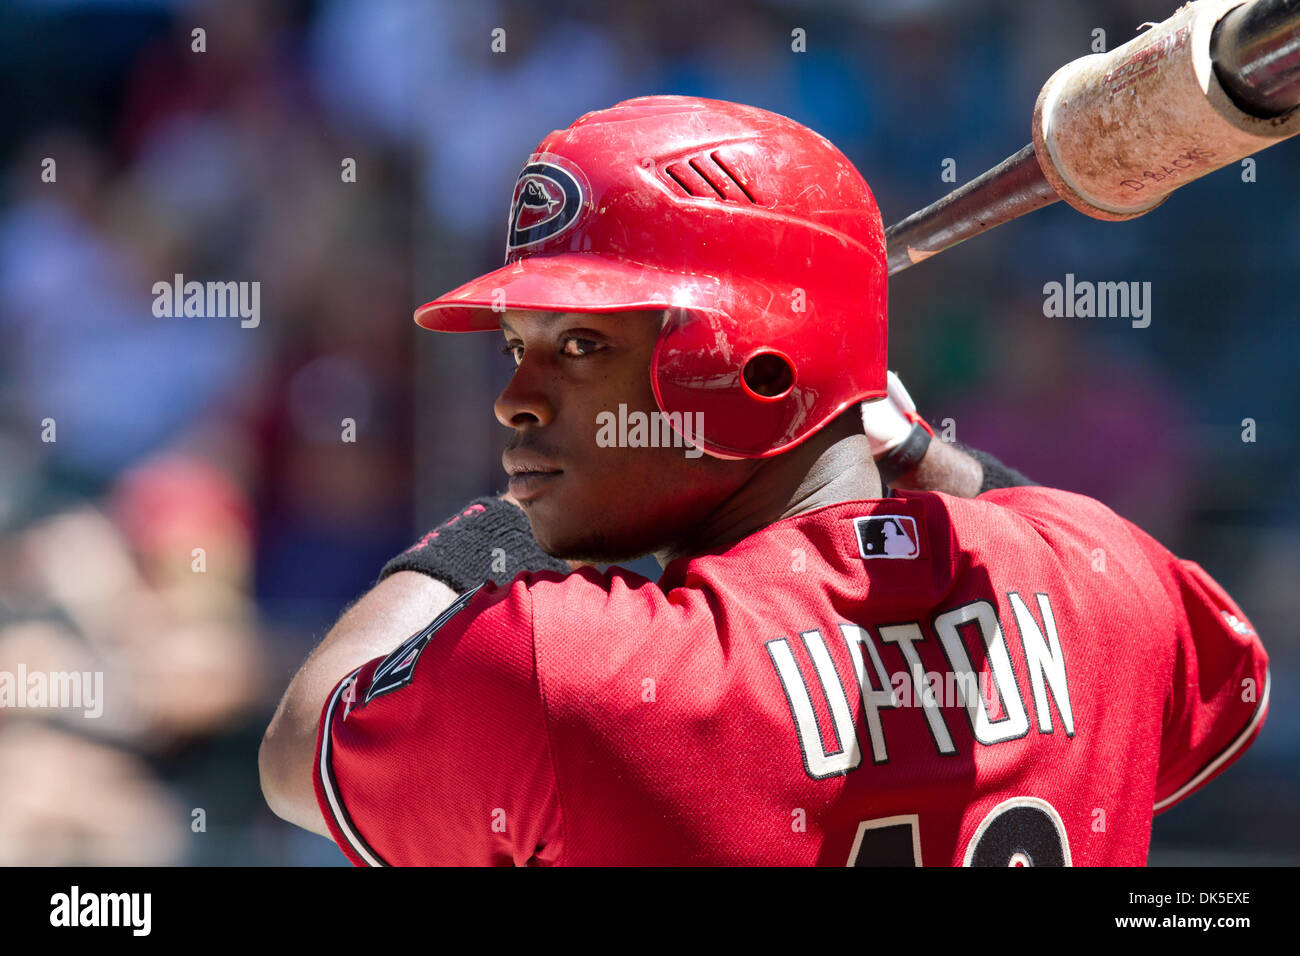 May 1, 2011 - Phoenix, Arizona, U.S - Arizona Diamondbacks Justin Upton (10) warms up before going up to bat against the Chicago Cubs. The Diamondbacks and Cubs squared off for the final game of a four game series at Chase Field in Phoenix, Arizona. (Credit Image: © Chris Pondy/Southcreek Global/ZUMAPRESS.com) Stock Photo